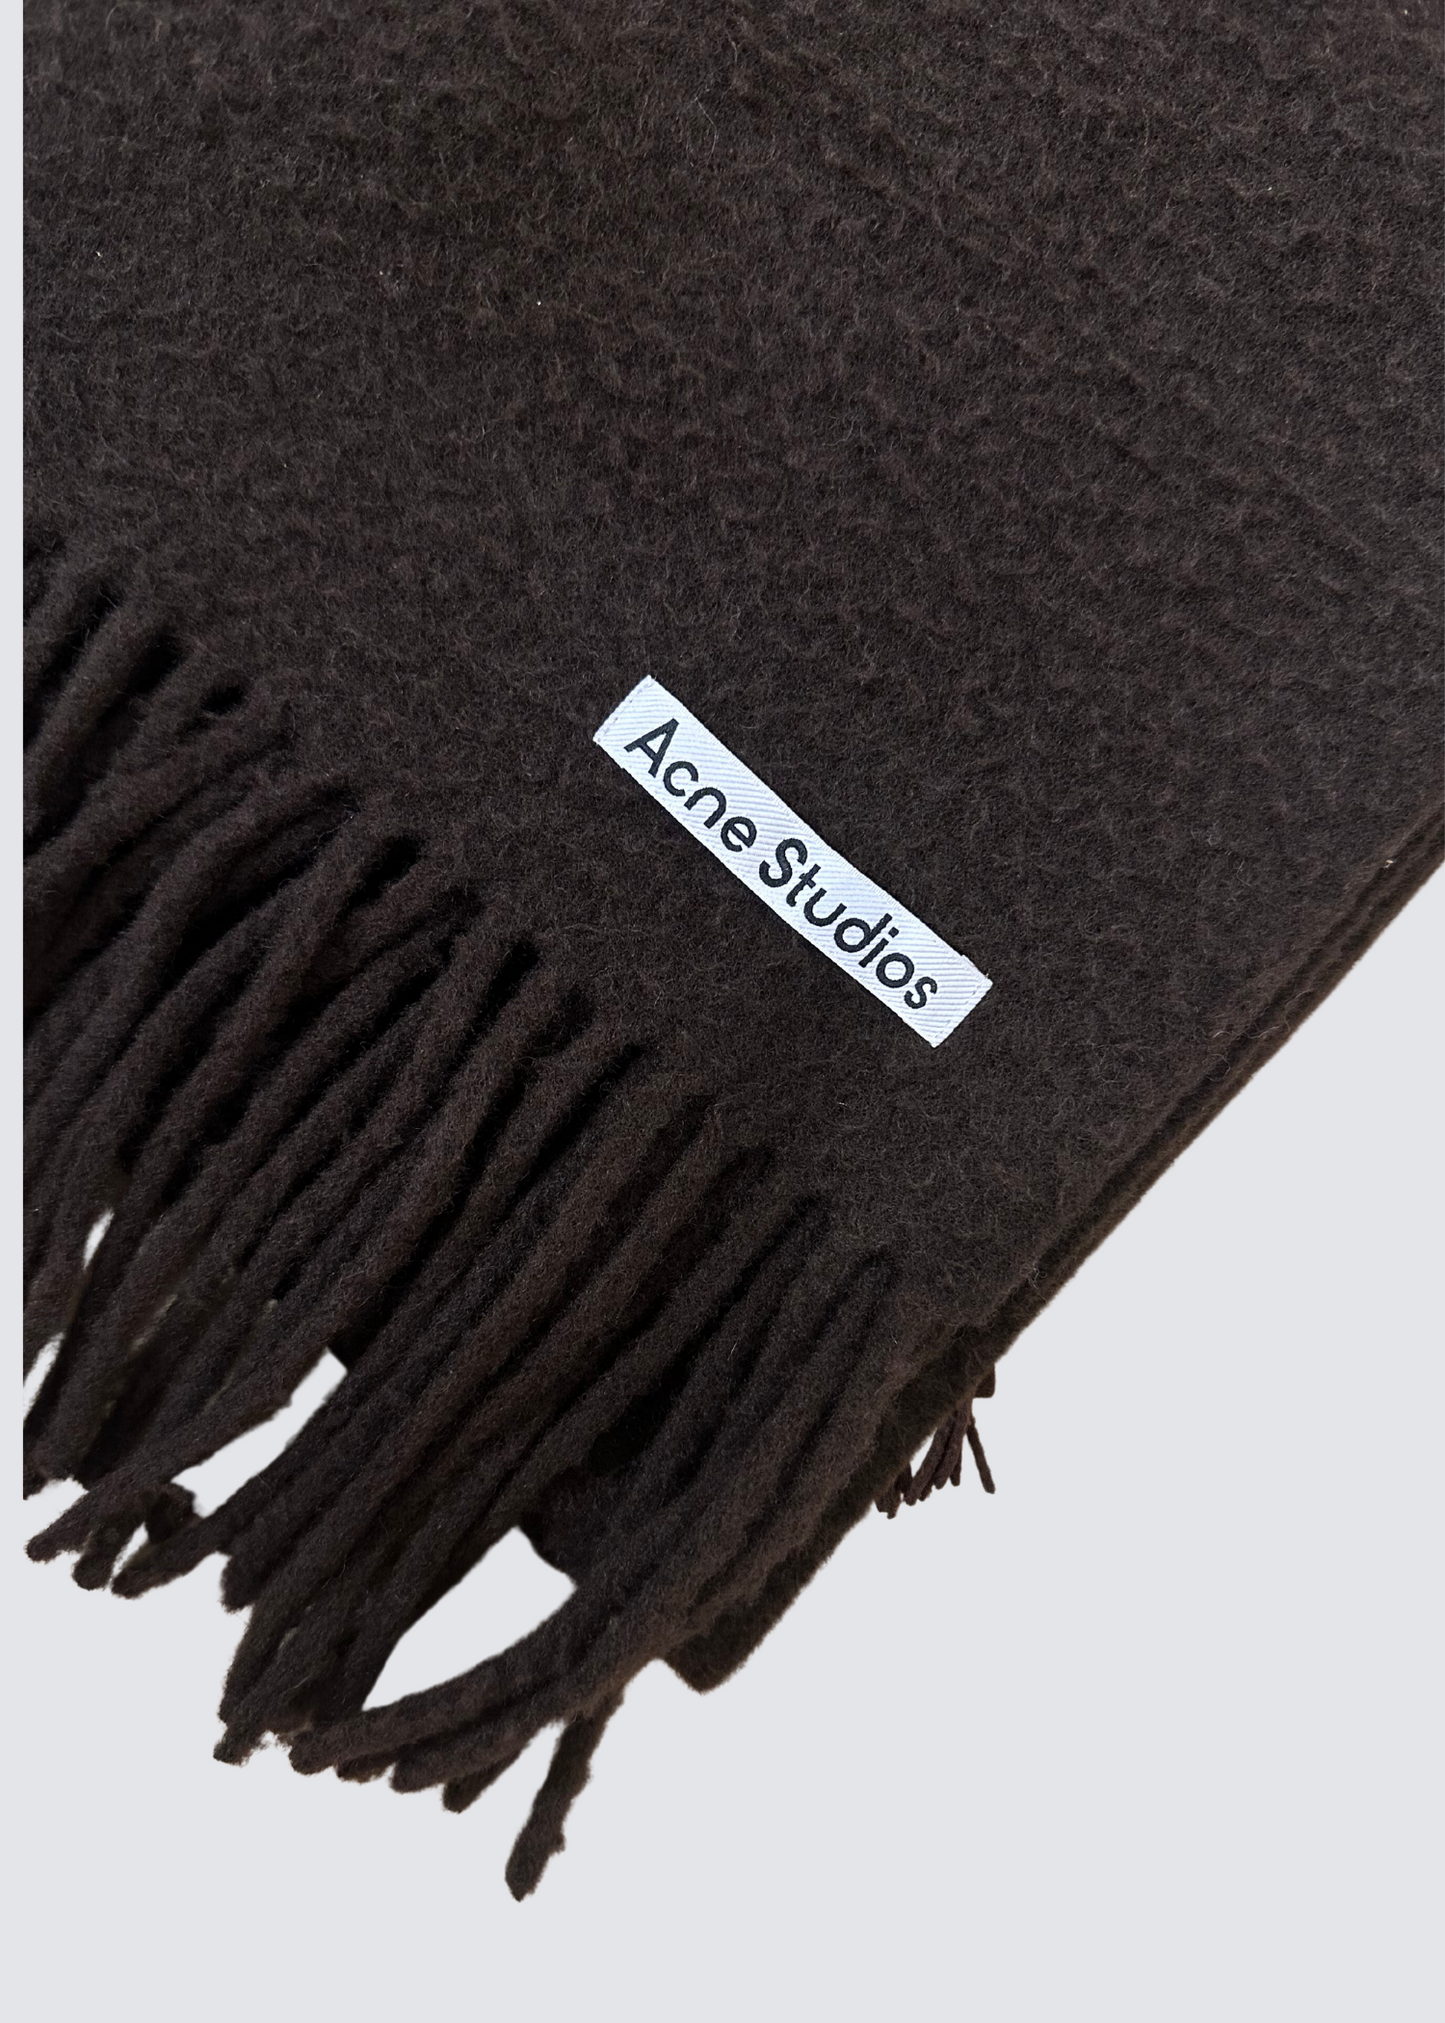 Chocolate Brown, Scarf